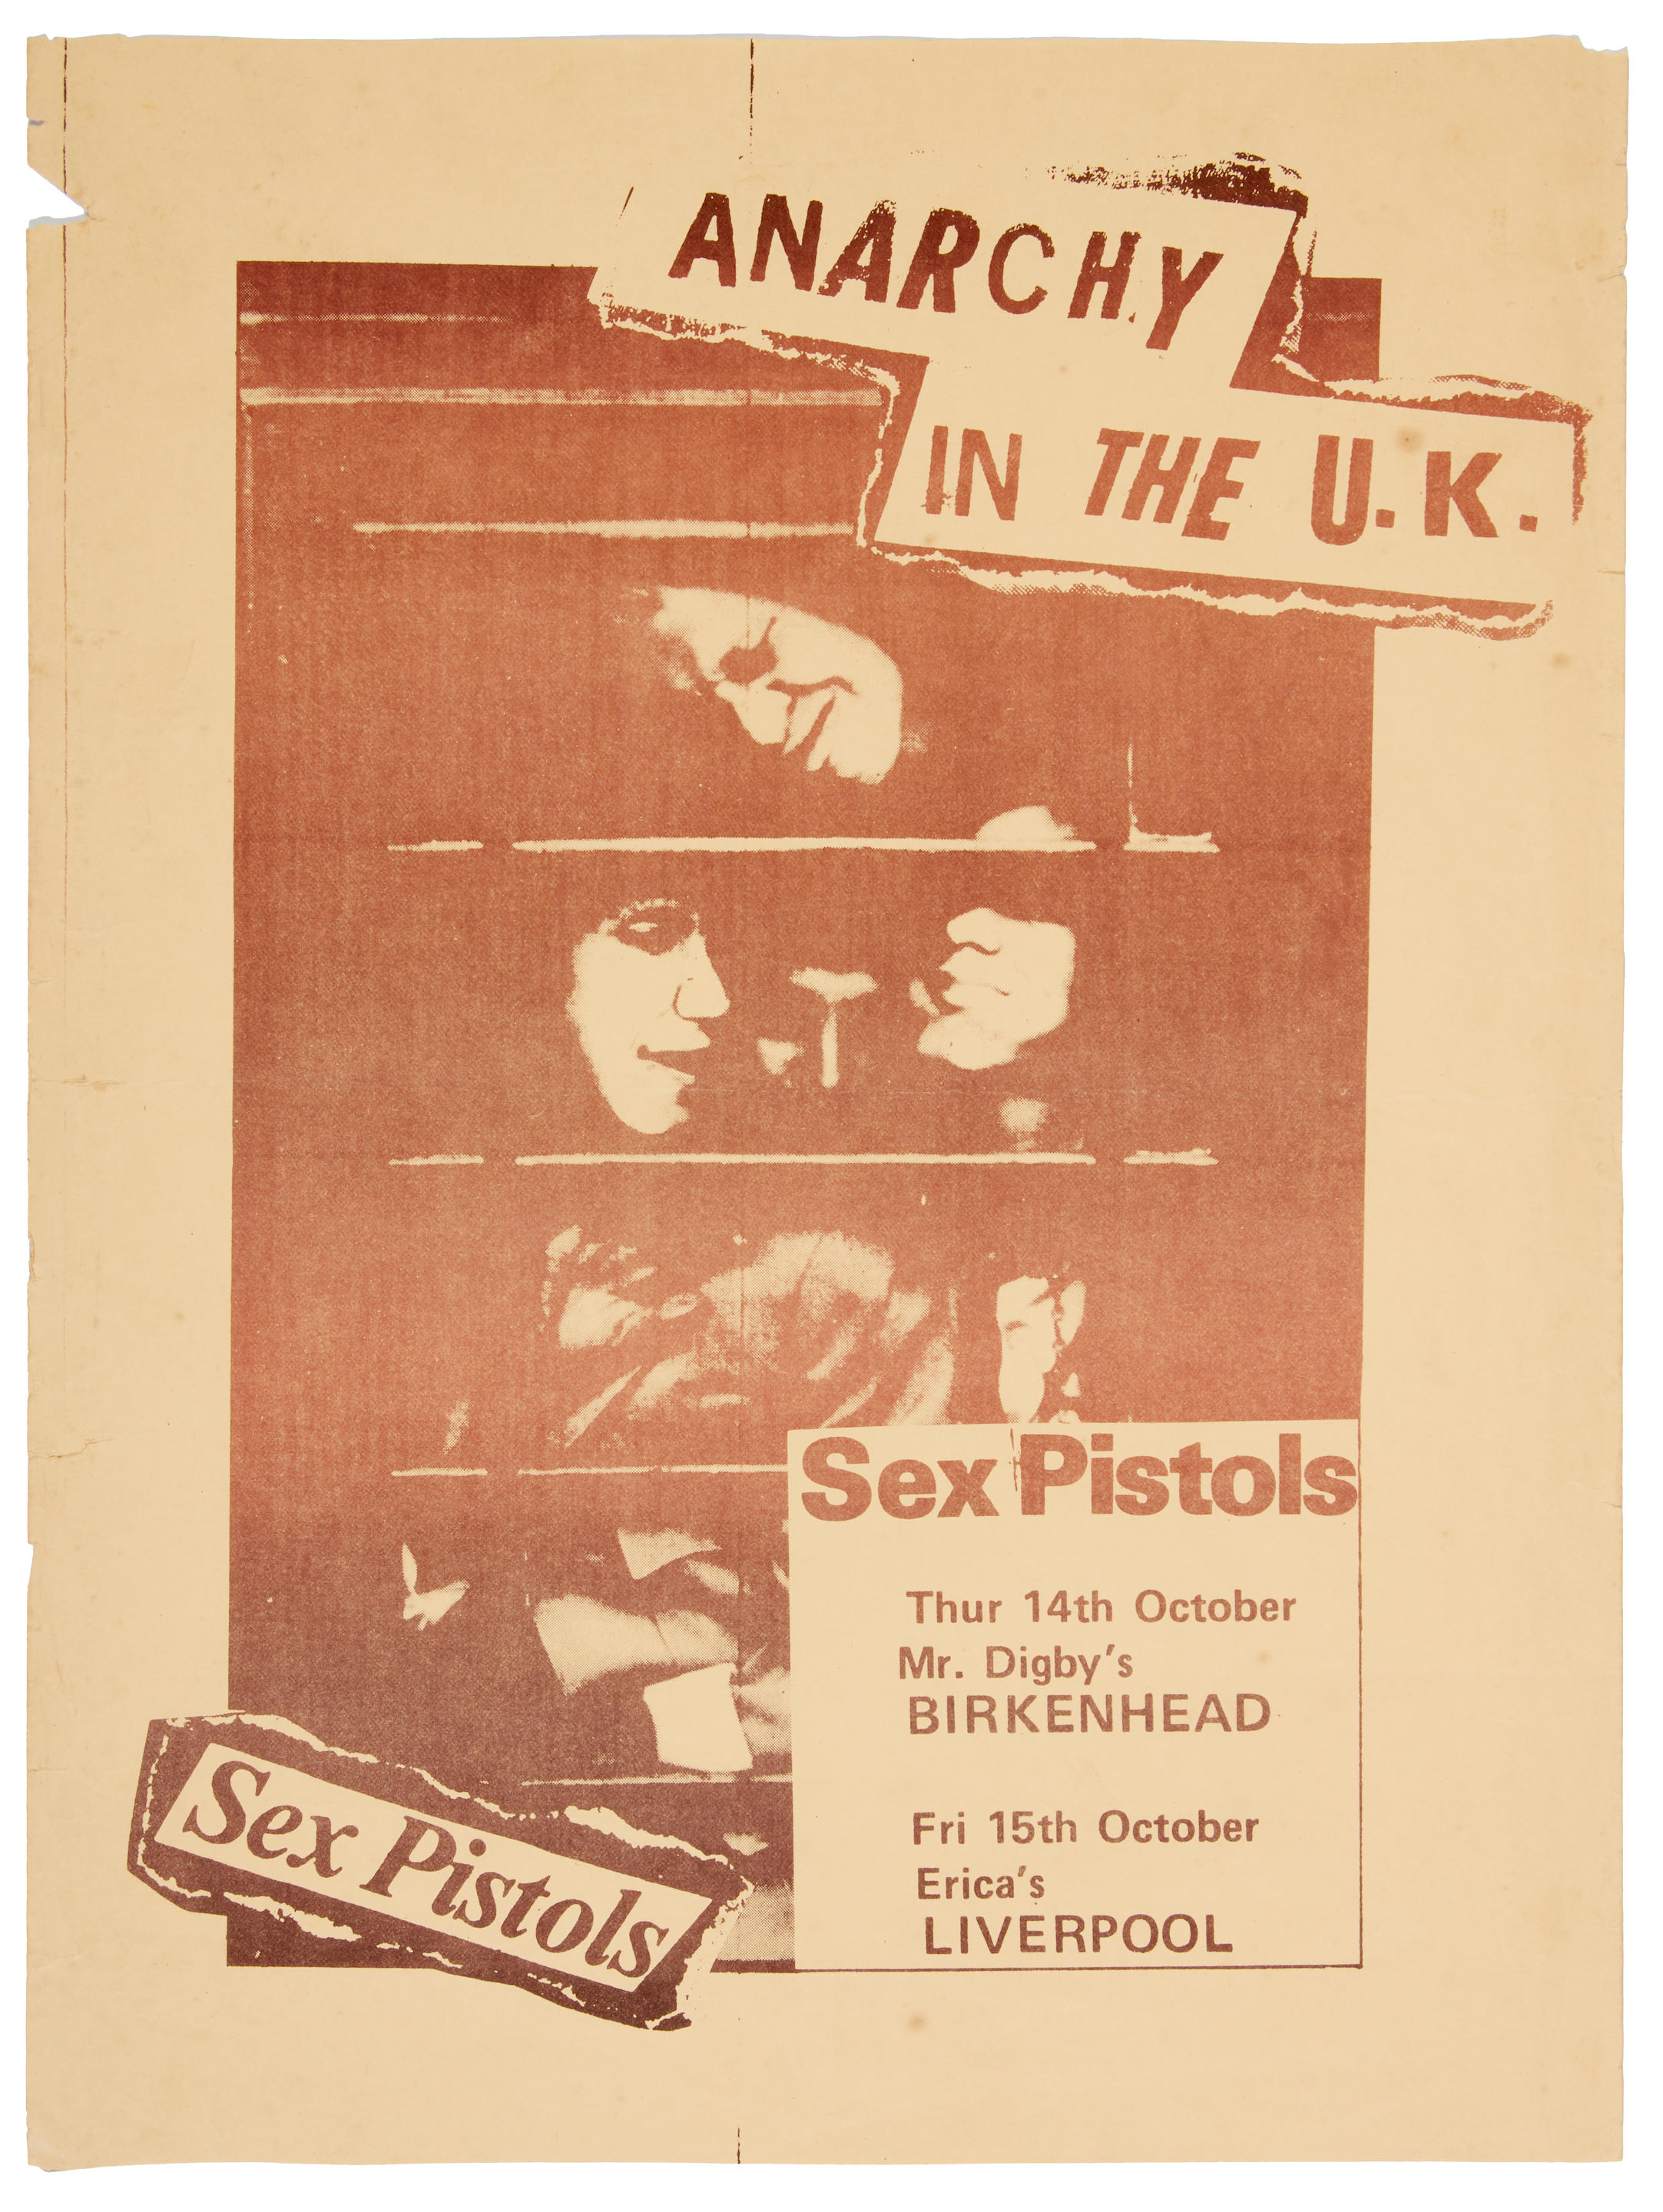 Bonhams A Rare Anarchy In The Uk Tour Poster For Two Sex Pistols